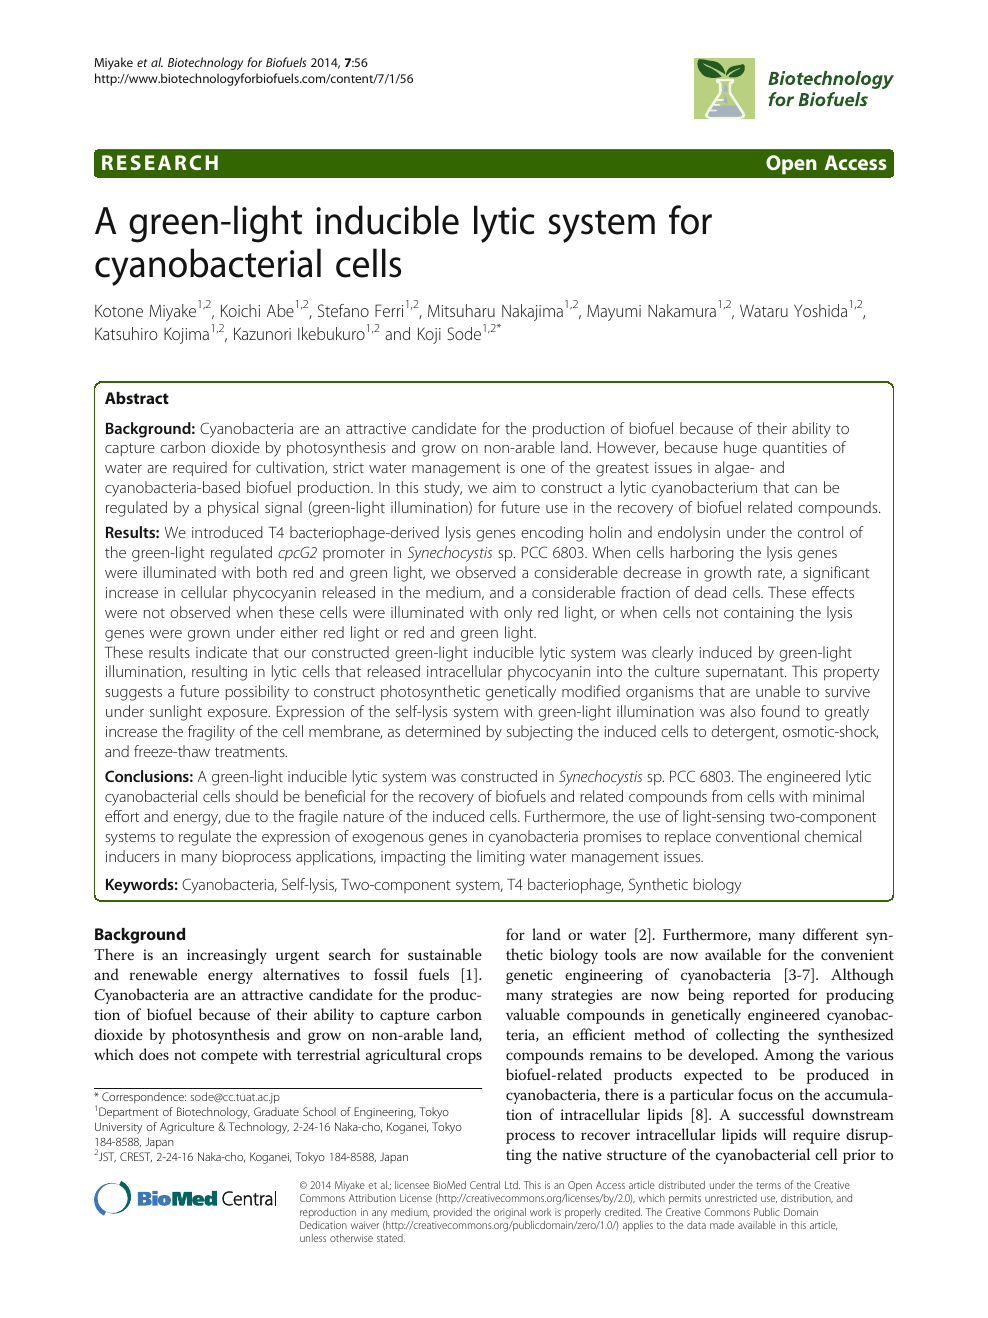 A Green Light Inducible Lytic System For Cyanobacterial Cells Topic Of Research Paper In Biological Sciences Download Scholarly Article Pdf And Read For Free On Cyberleninka Open Science Hub